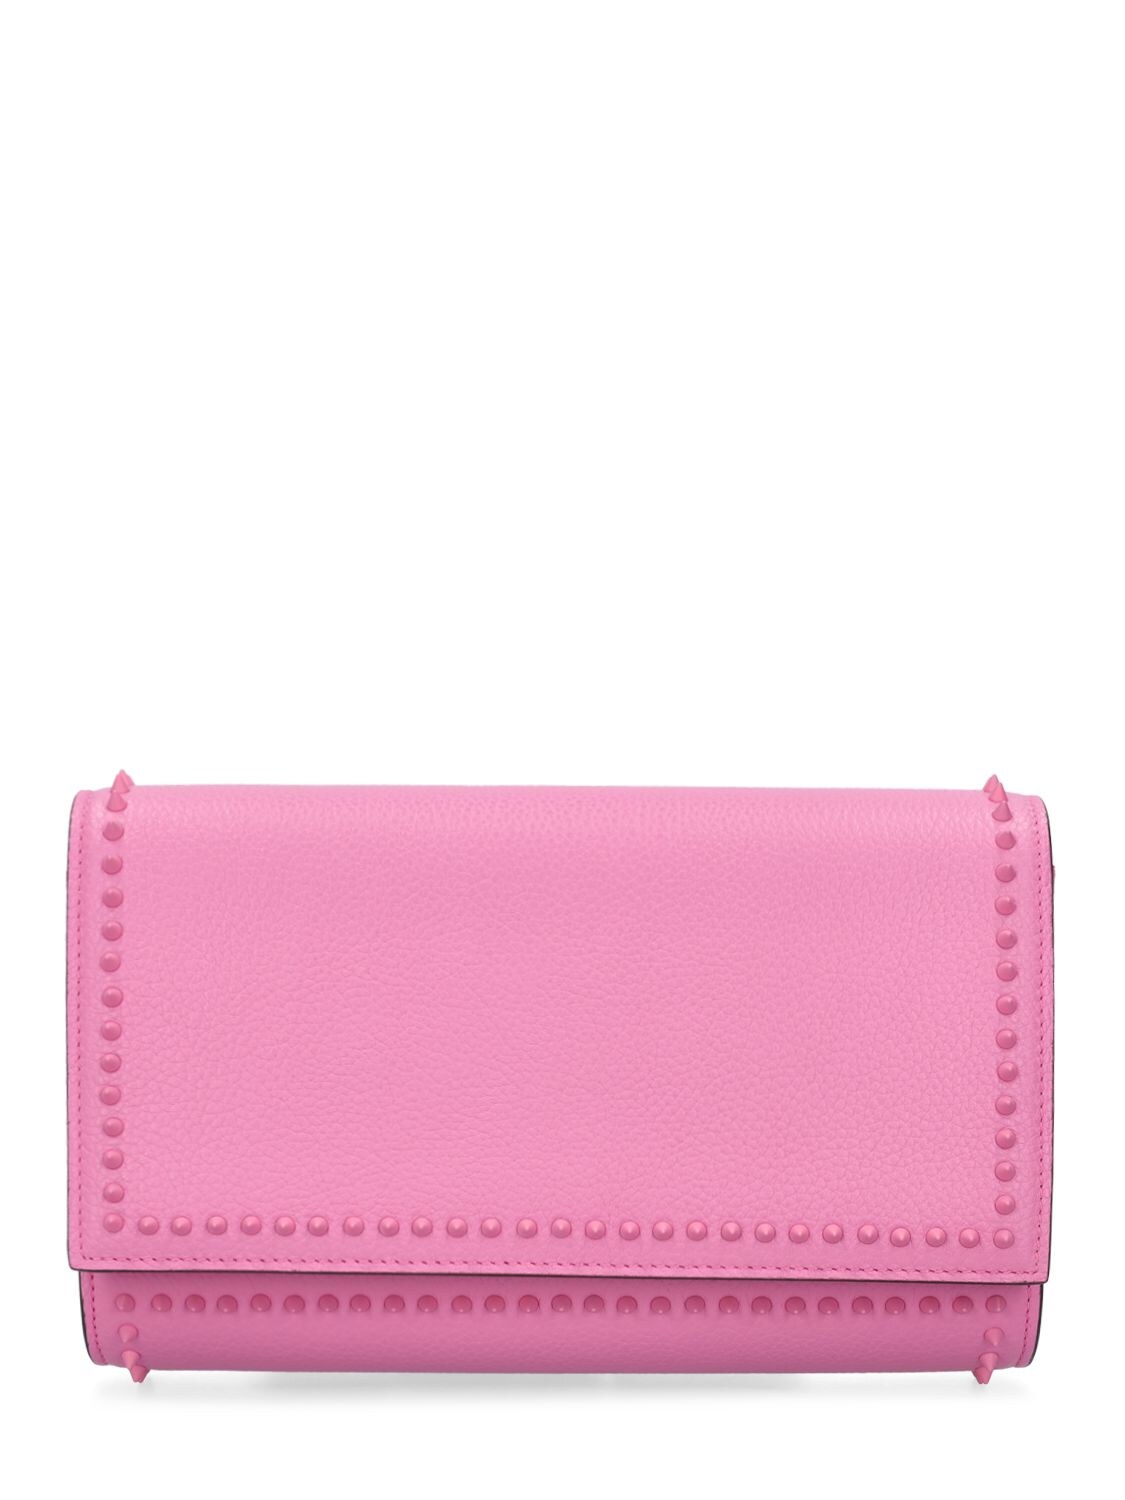 Paloma Embellished Leather Clutch in Red - Christian Louboutin